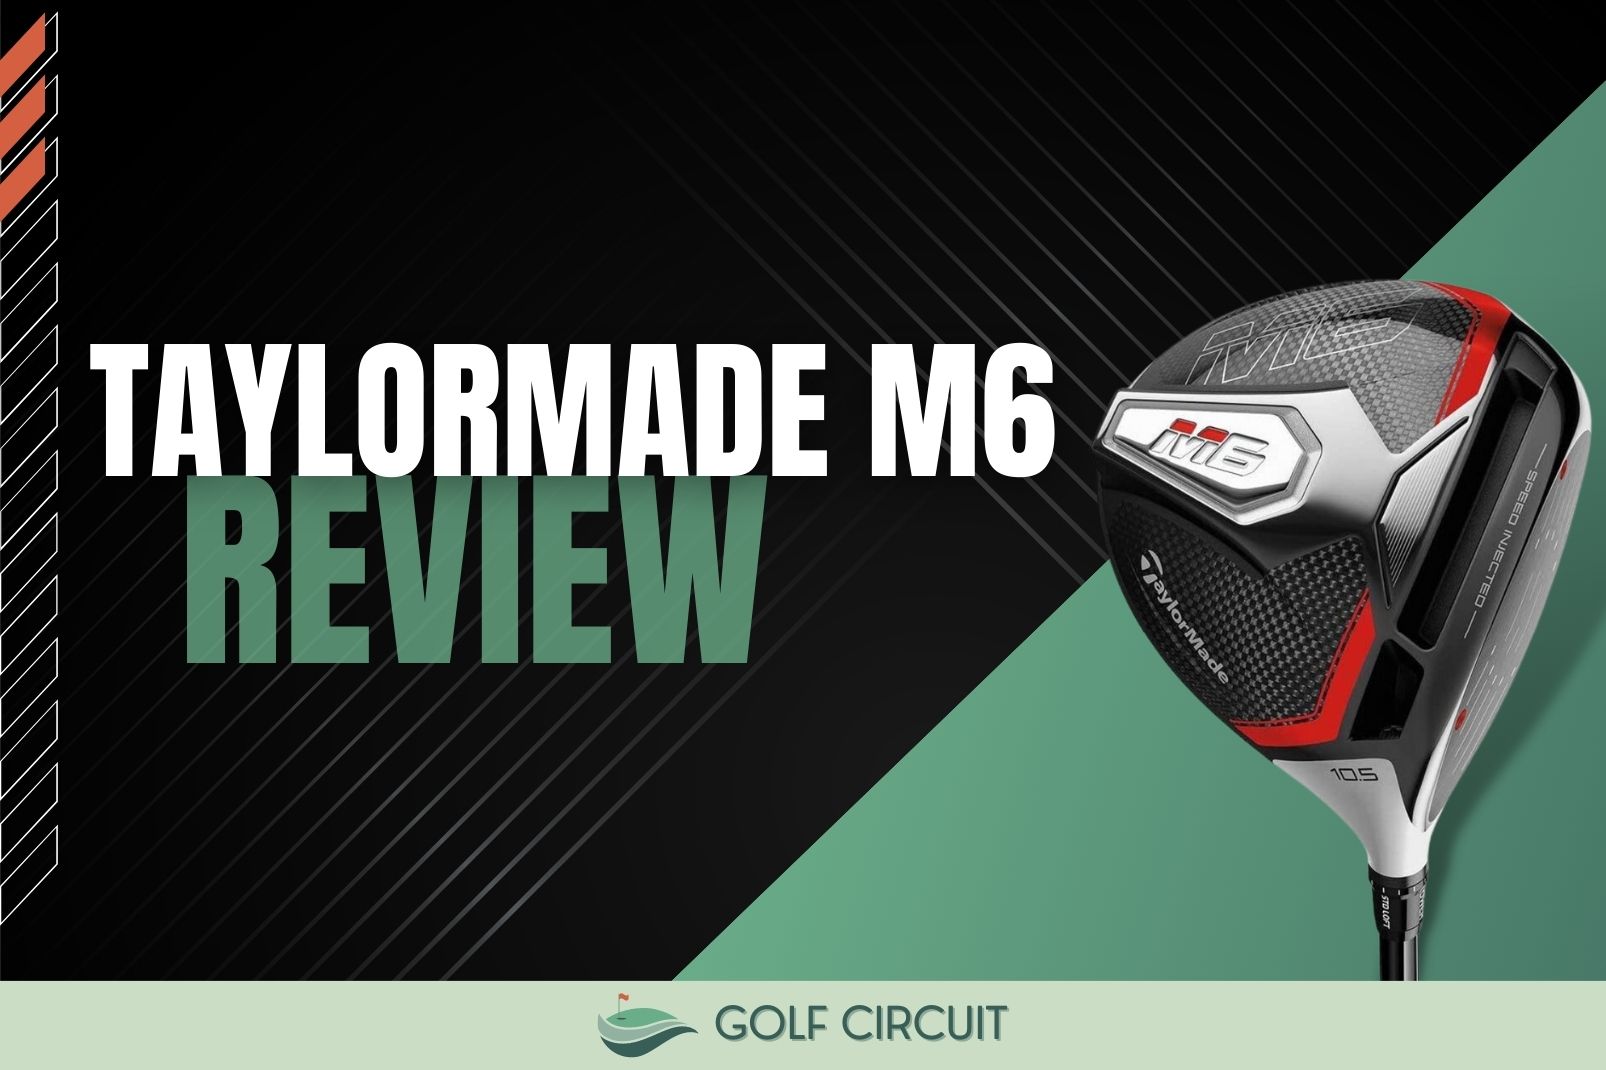 Taylormade m6 driver review